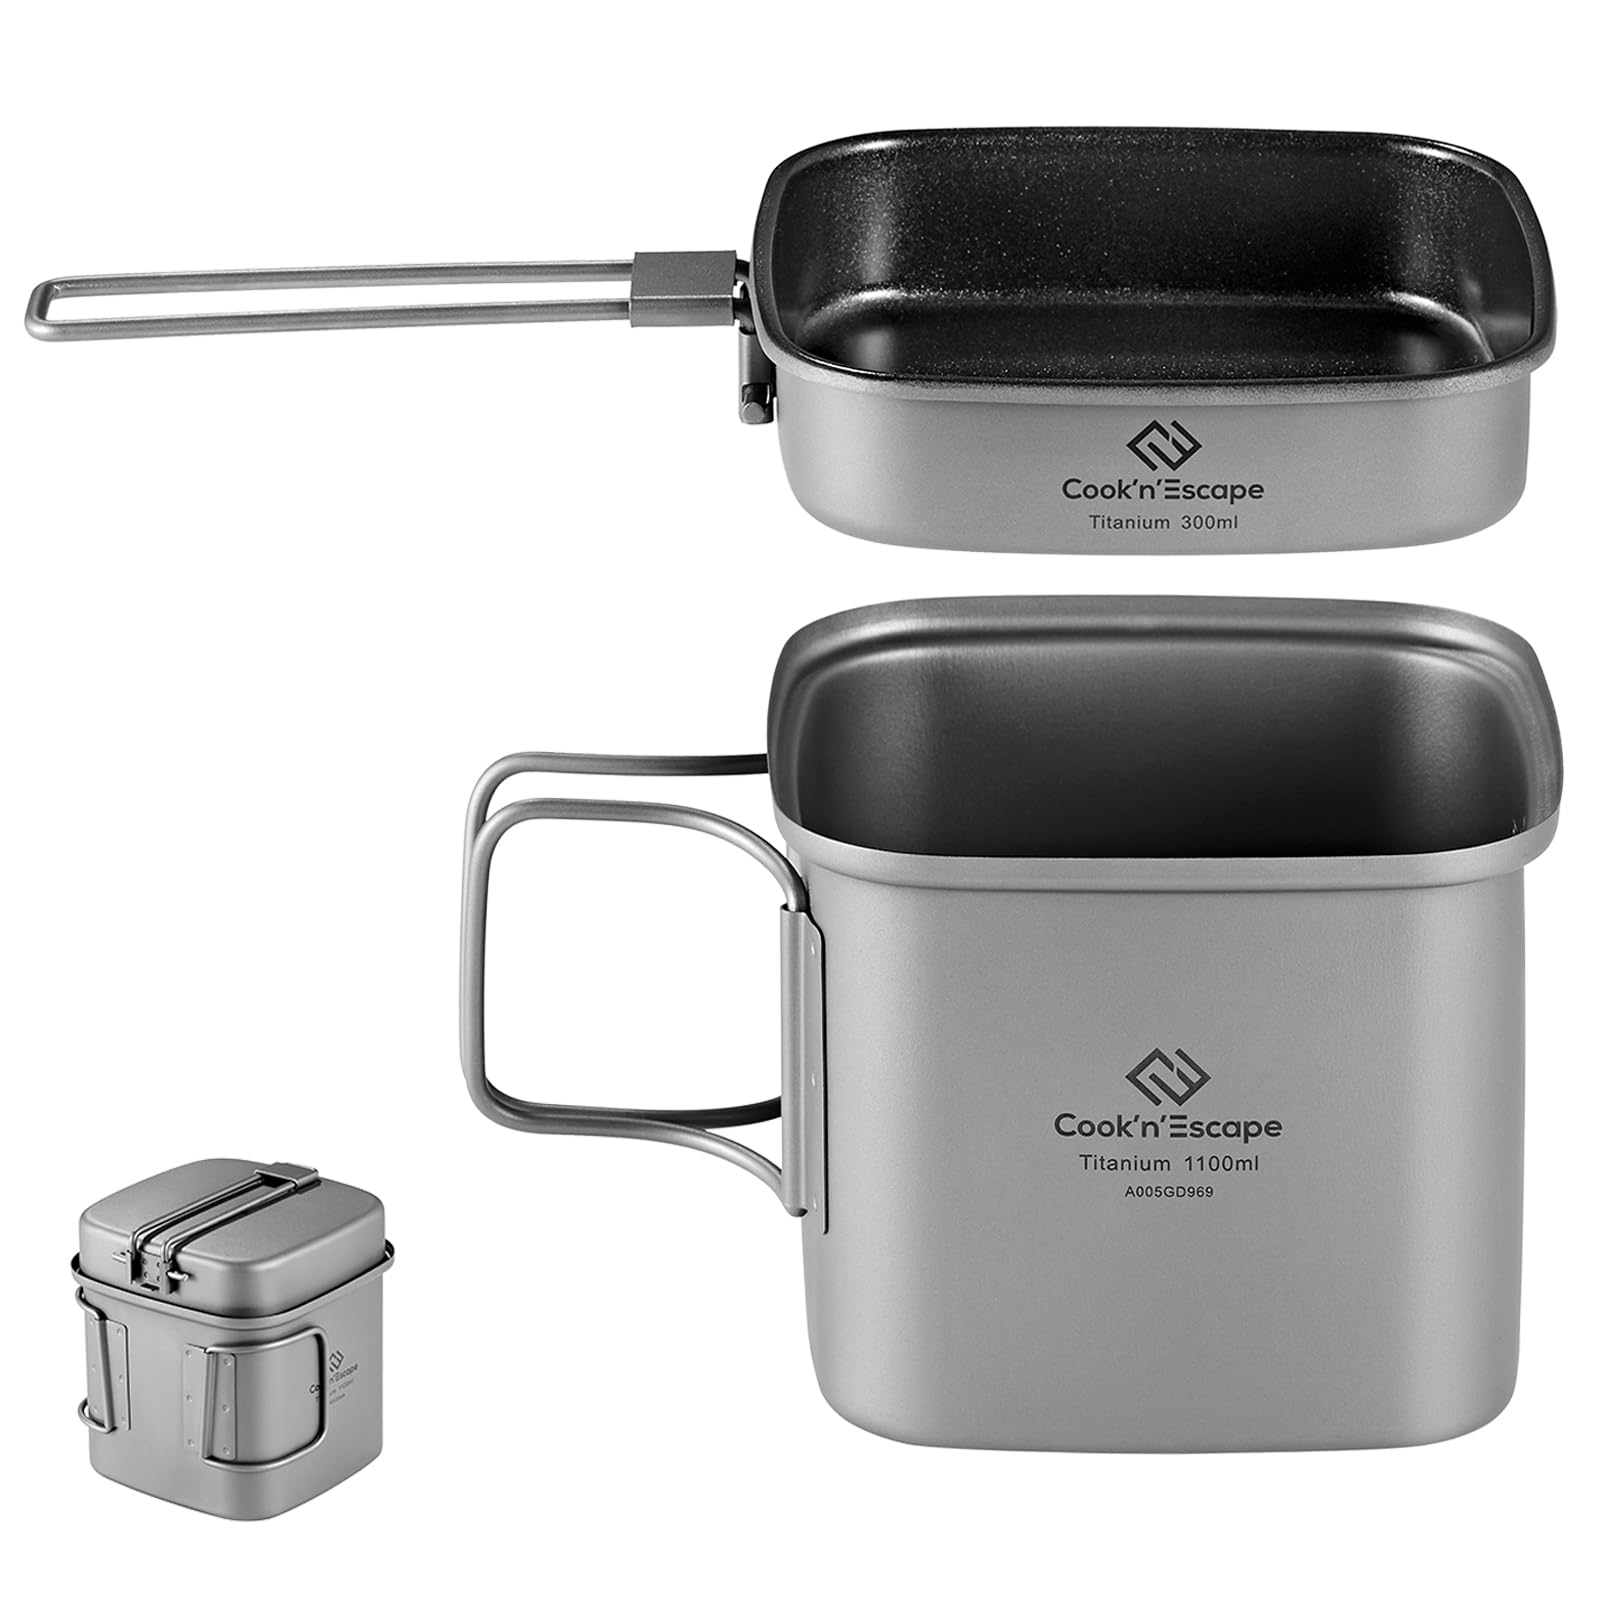 COOKNESCAPE Titanium Camping Cooking Pot 1100ML300ML Camping Cookware Set with Folding HandleCompact Frying Pan Open Ove